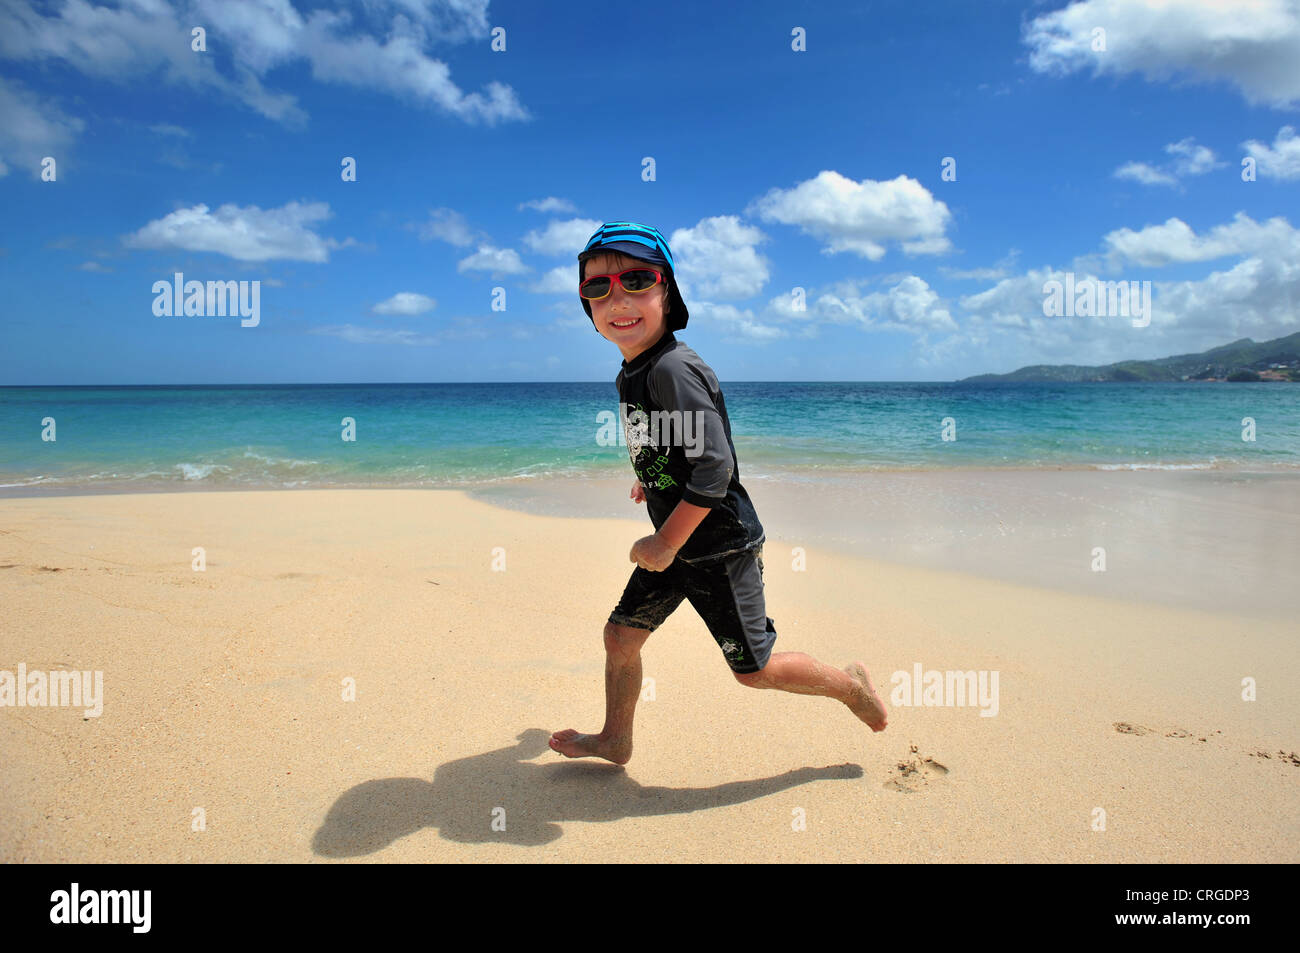 A four year old boy wearing sun suit and sunglasses runs on the beach, Grenada, Caribbean, West Indies Stock Photo